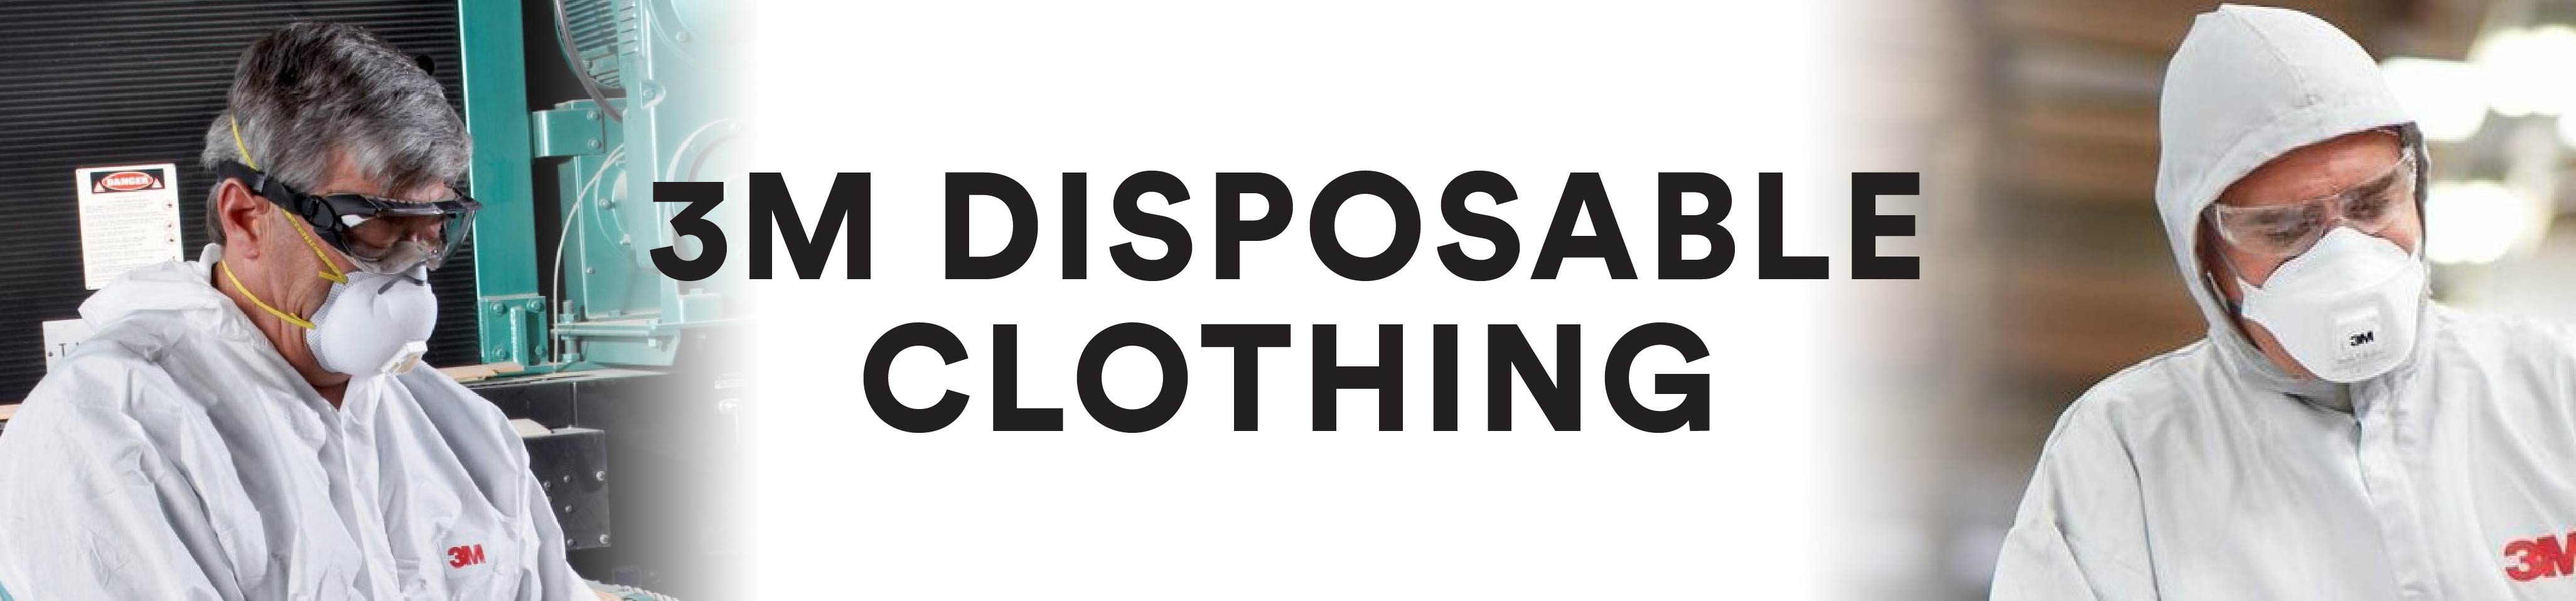 3M Disposable Clothing